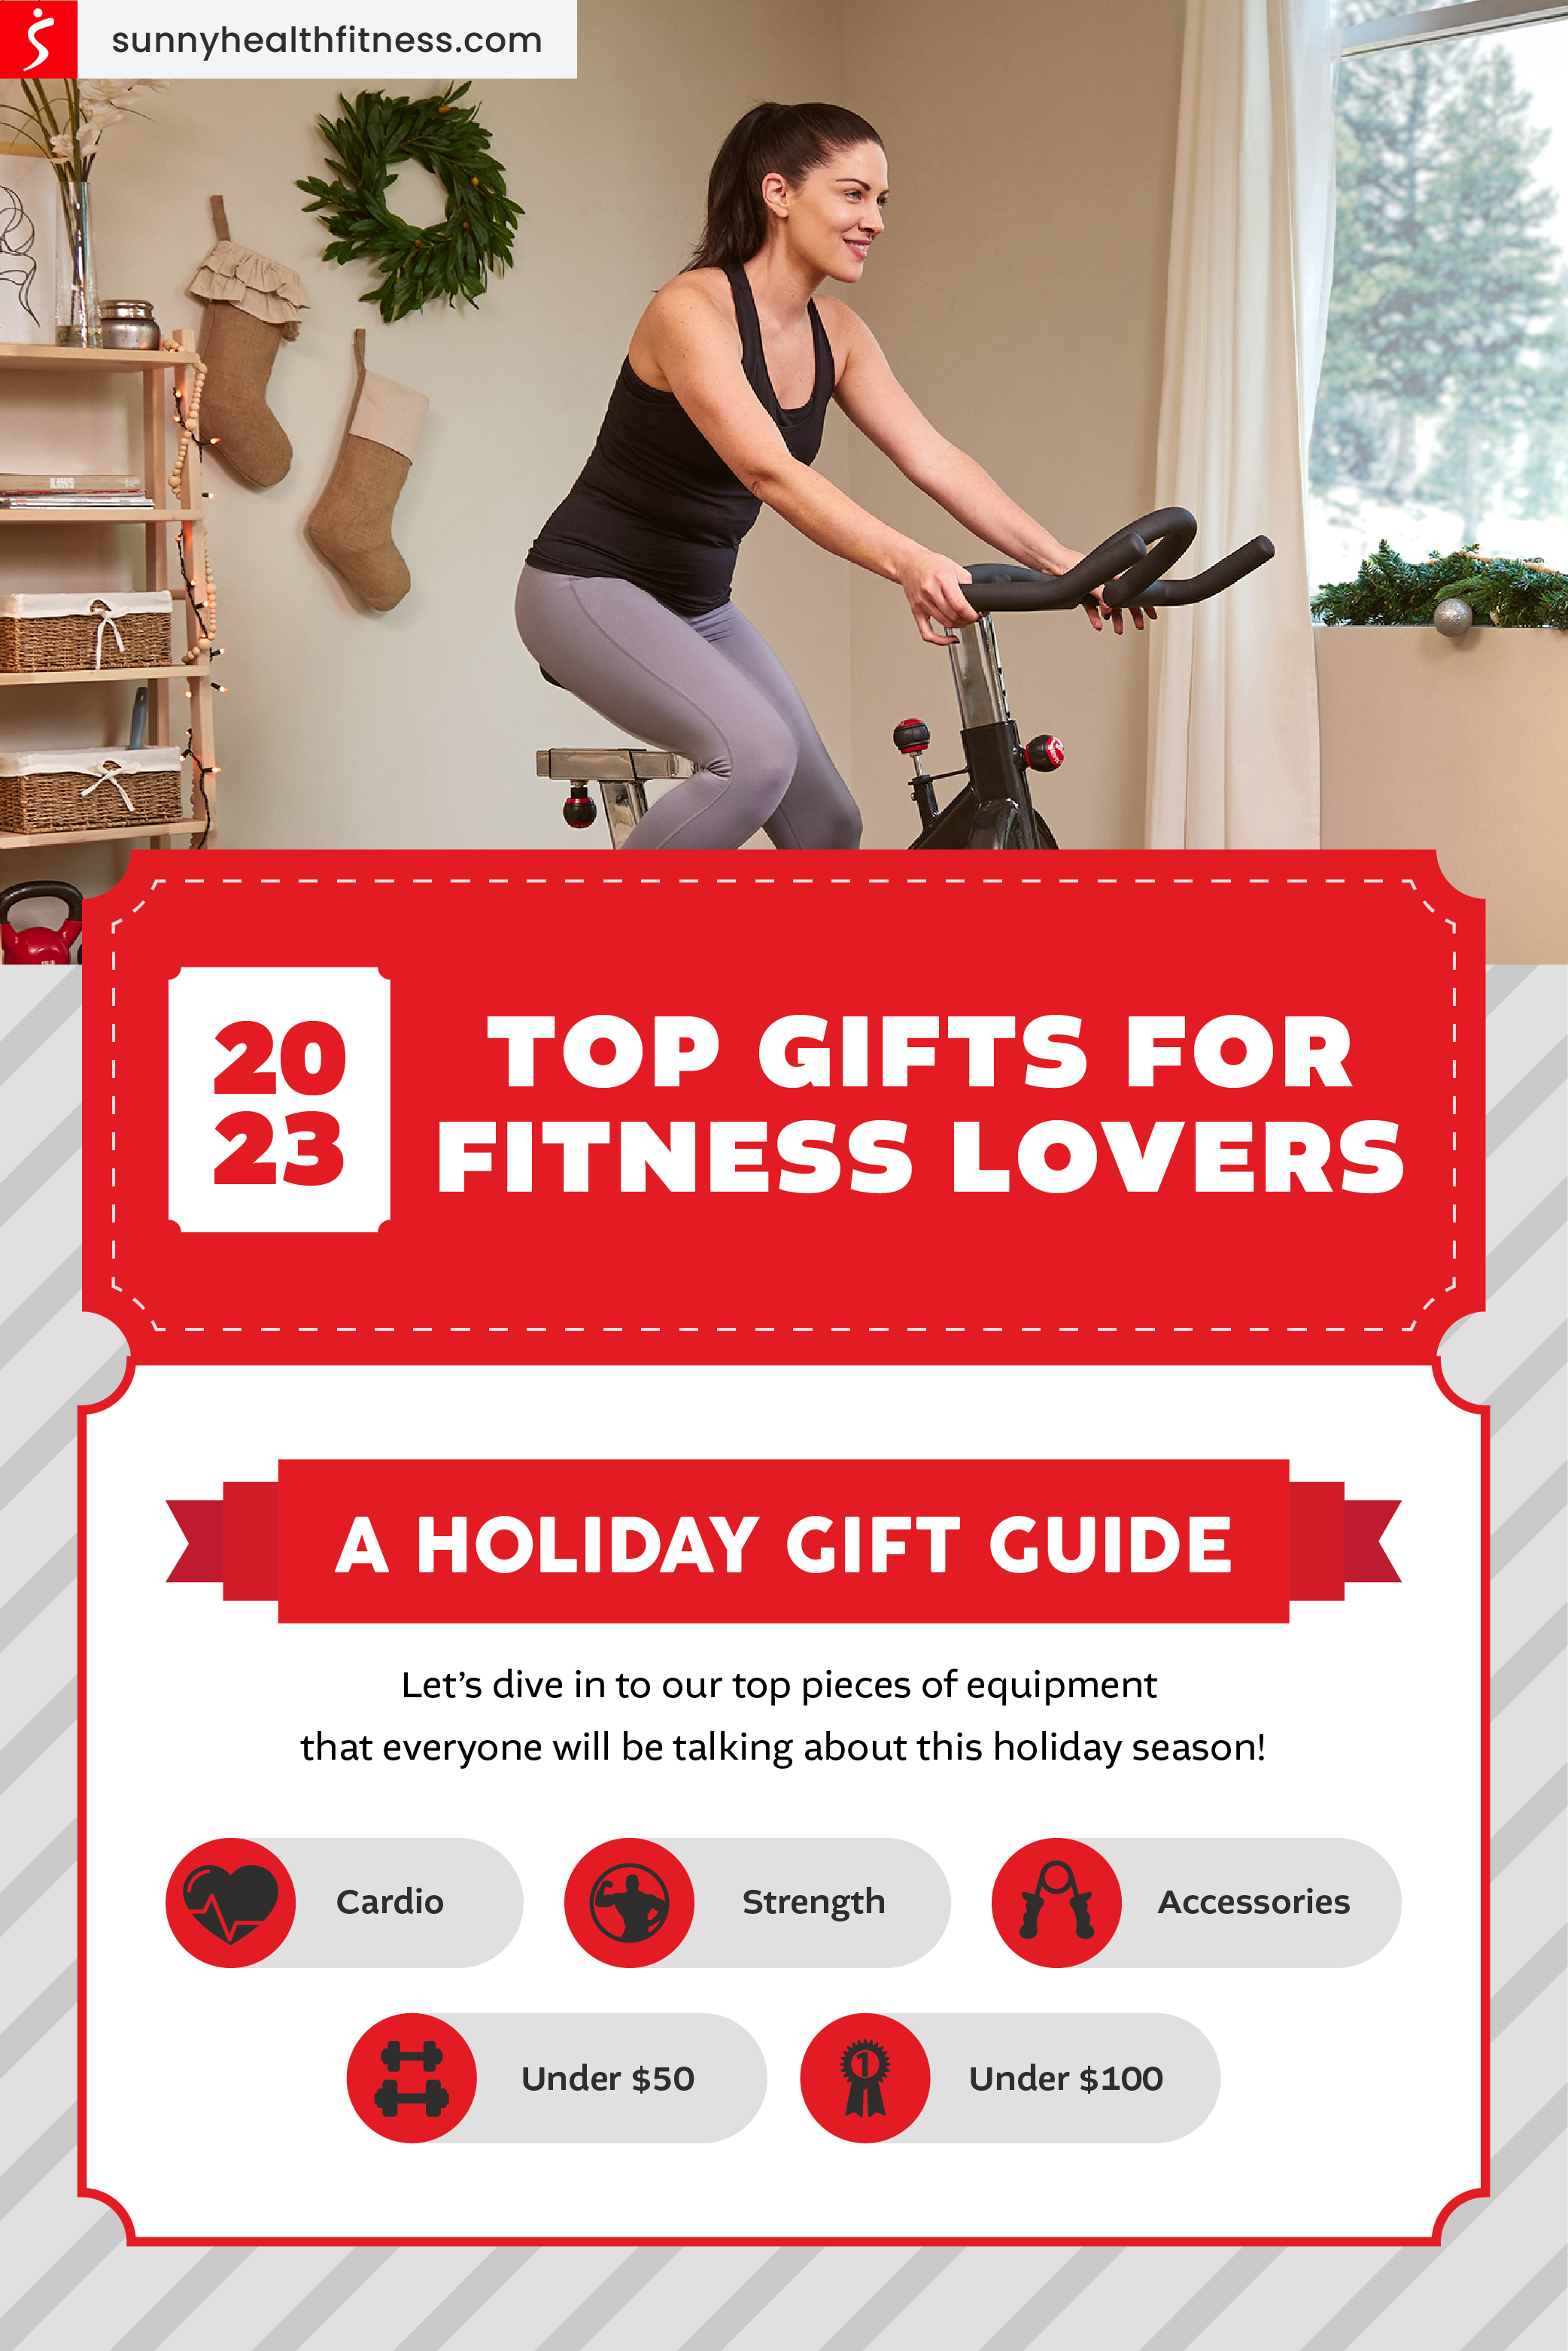 Holiday Gift Guide Infographic